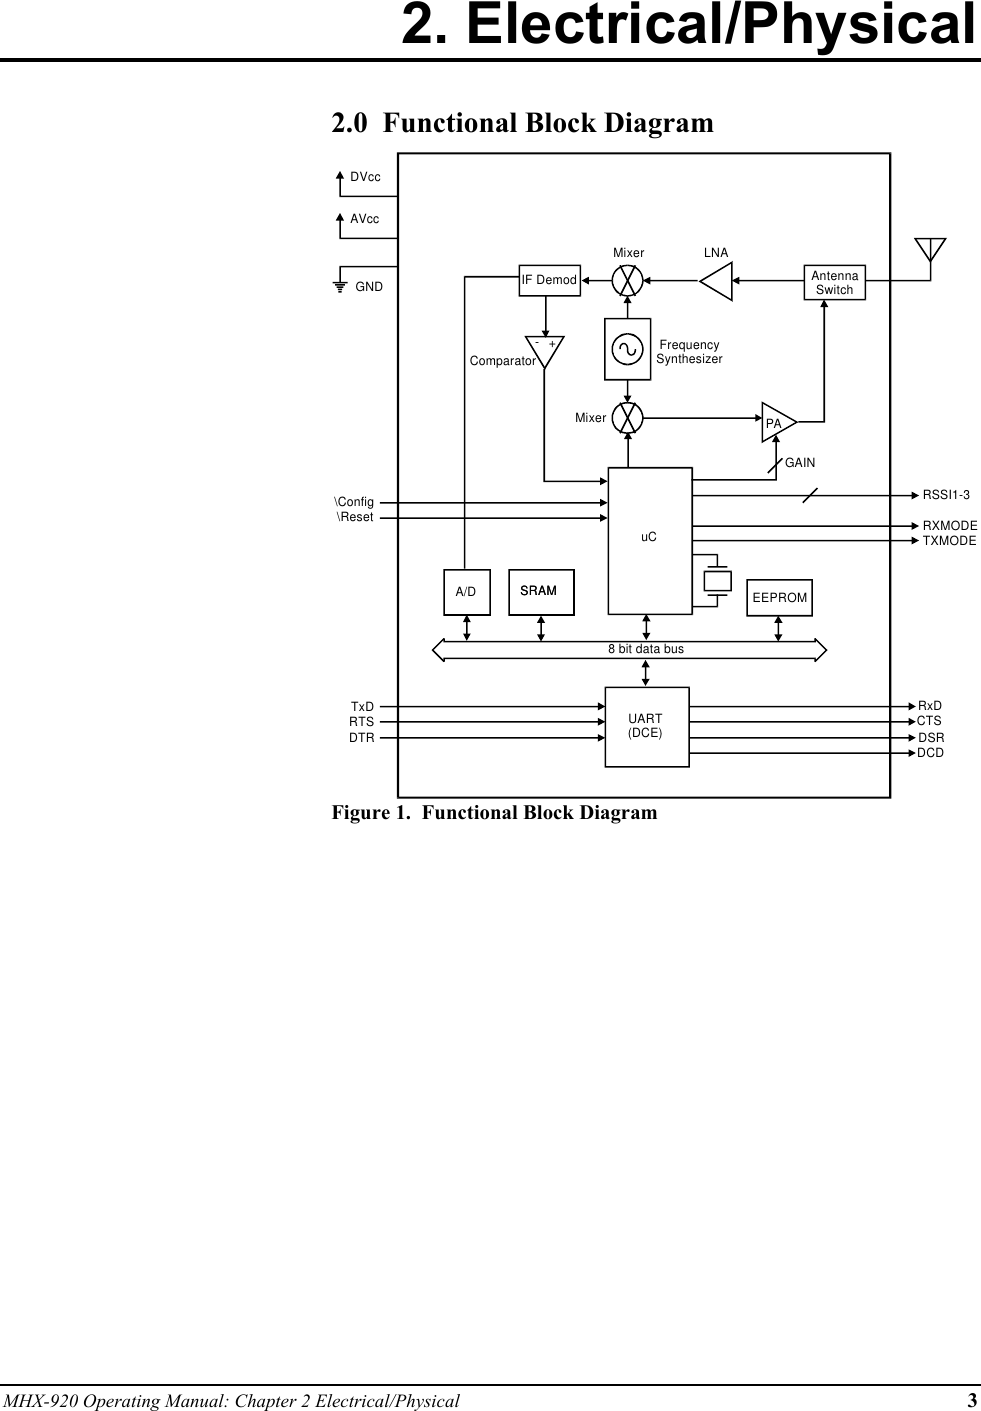 MHX-920 Operating Manual: Chapter 2 Electrical/Physical 32. Electrical/Physical2.0  Functional Block DiagramAntennaSwitchMixerLNAMixerIF DemodFrequencySynthesizerPAComparator+-uC8 bit data busUART(DCE)GAINA/D SRAM EEPROMSRAMCTSDCDDSRRxDDTRTxDRTS\Config\ResetRSSI1-3RXMODETXMODEDVccAVccGNDFigure 1.  Functional Block Diagram